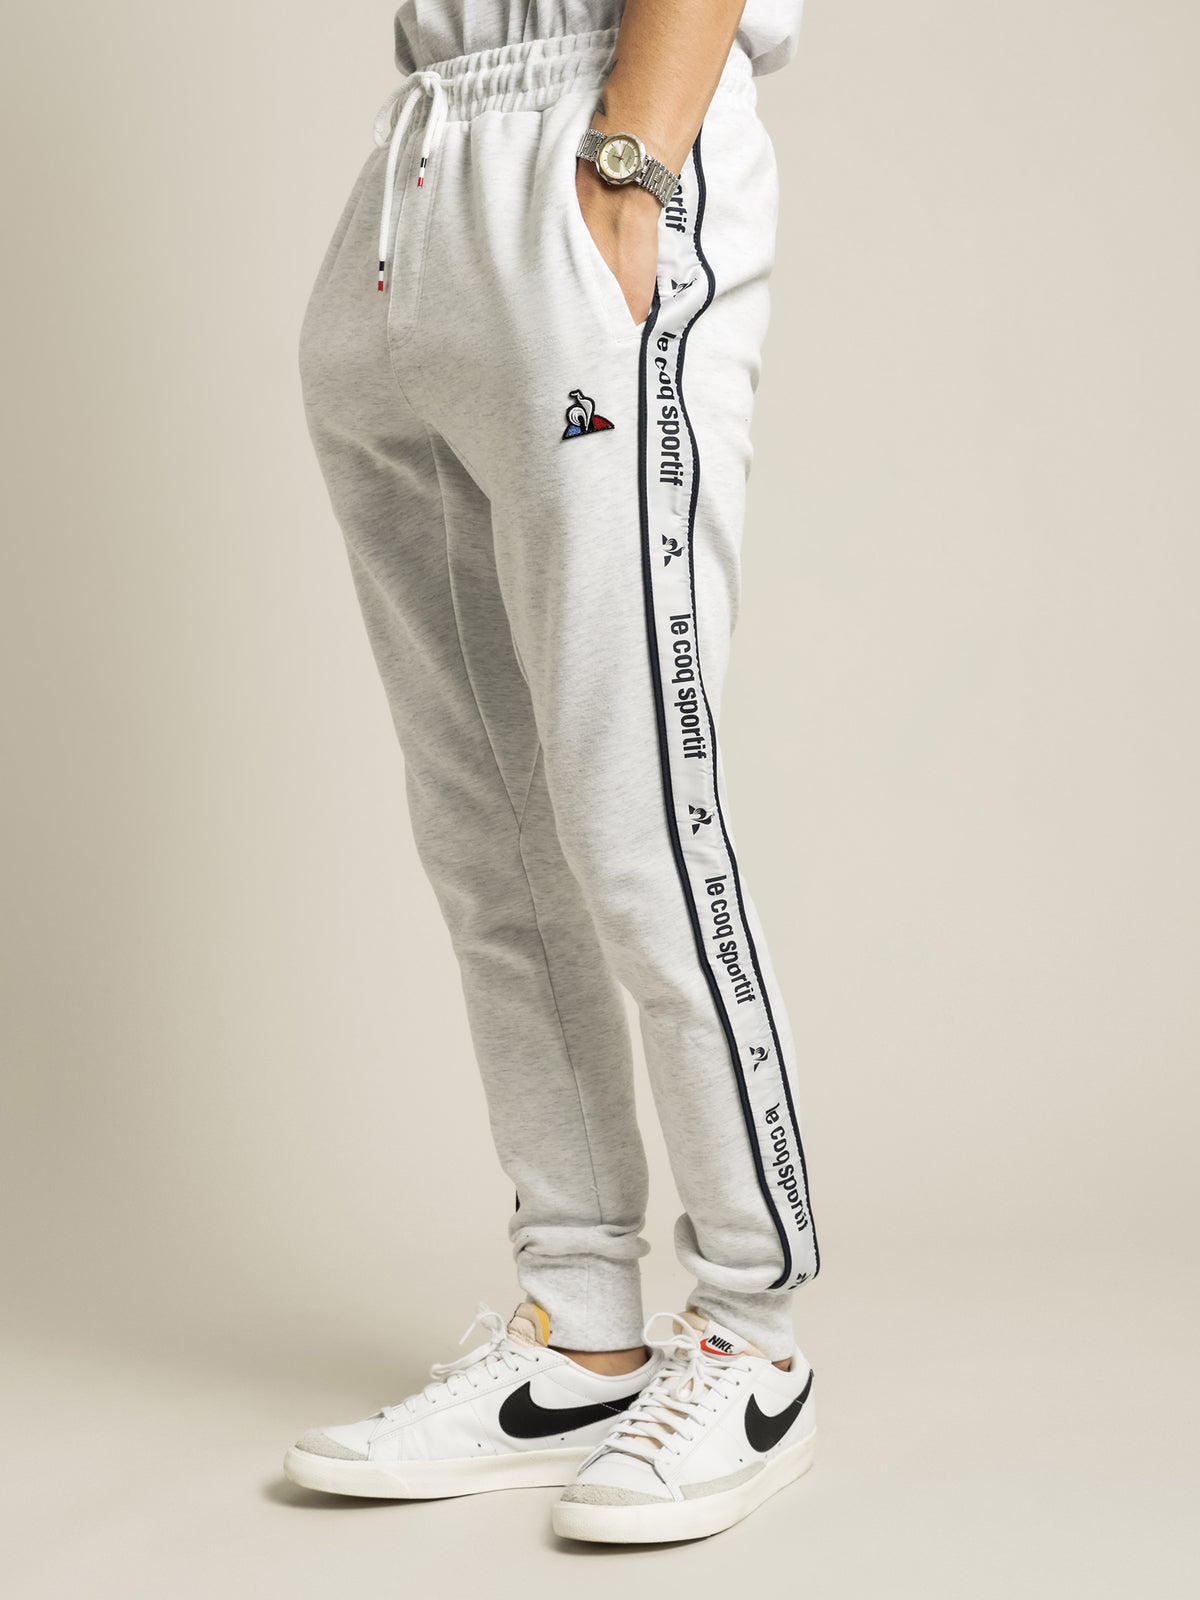 Royale Track Pants in Snow Marle